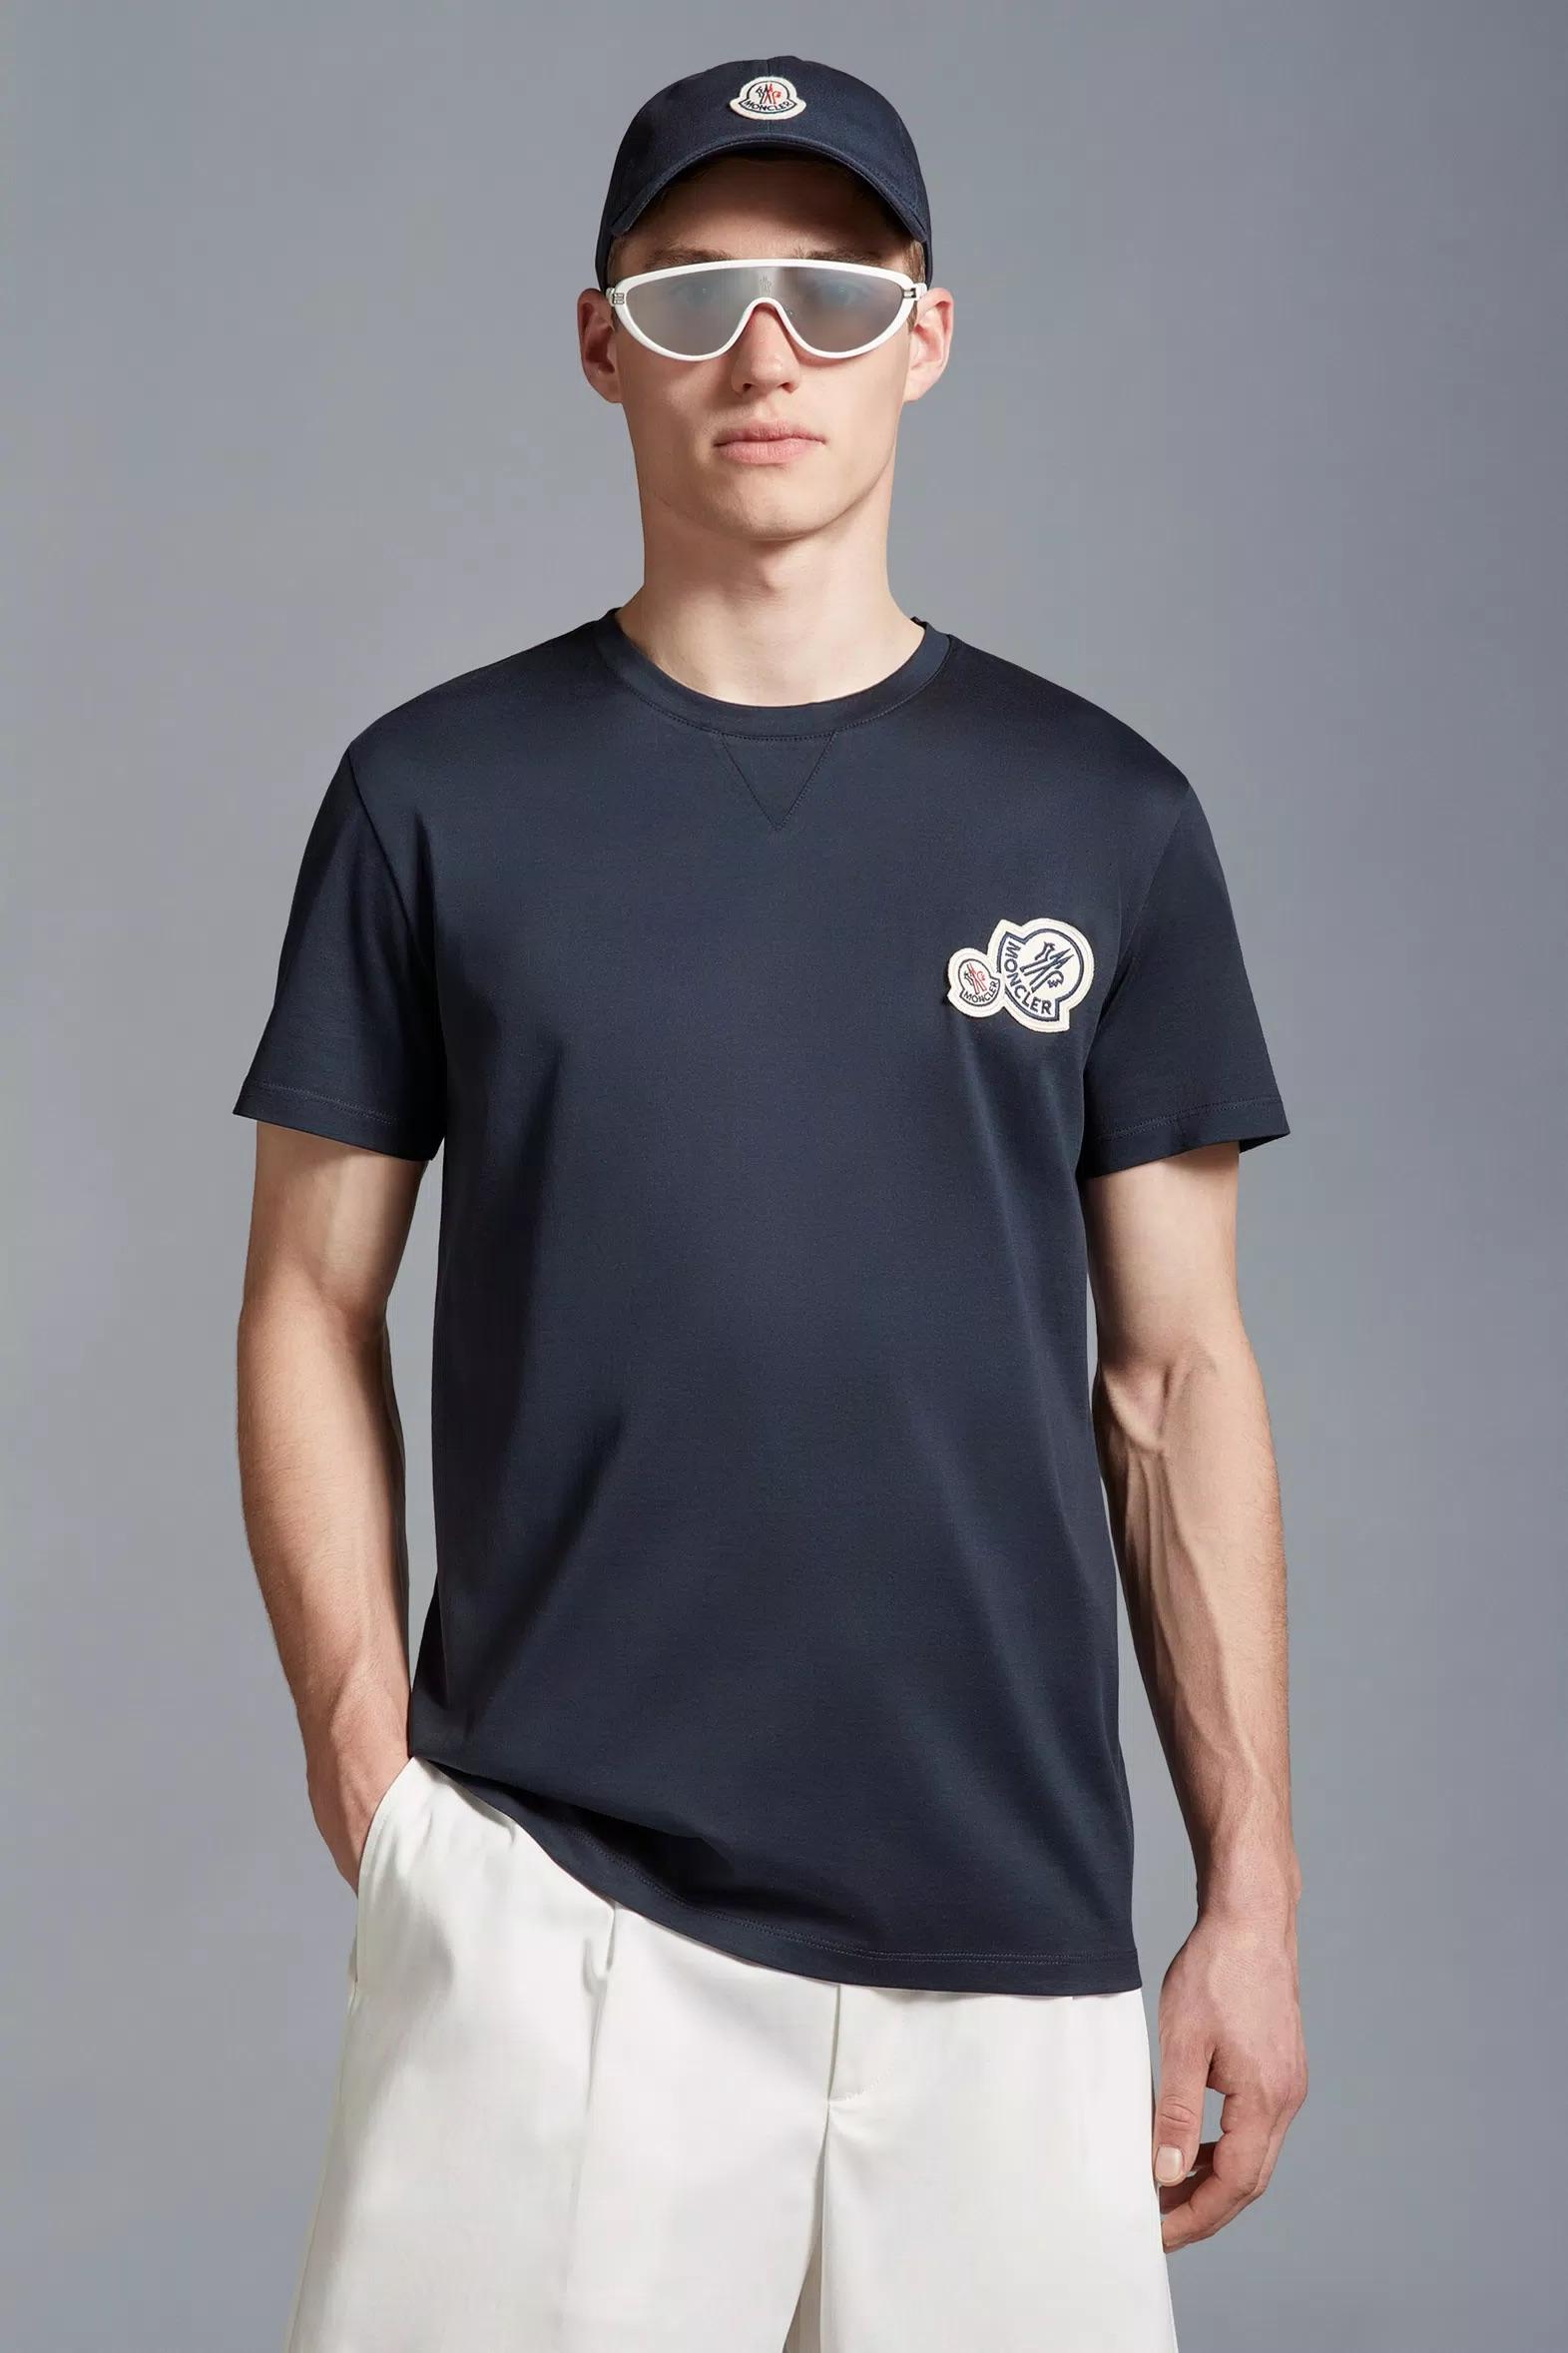 MONCLER T-SHIRT モンクレール Tシャツ 正規取扱店 公式通販 送料無料